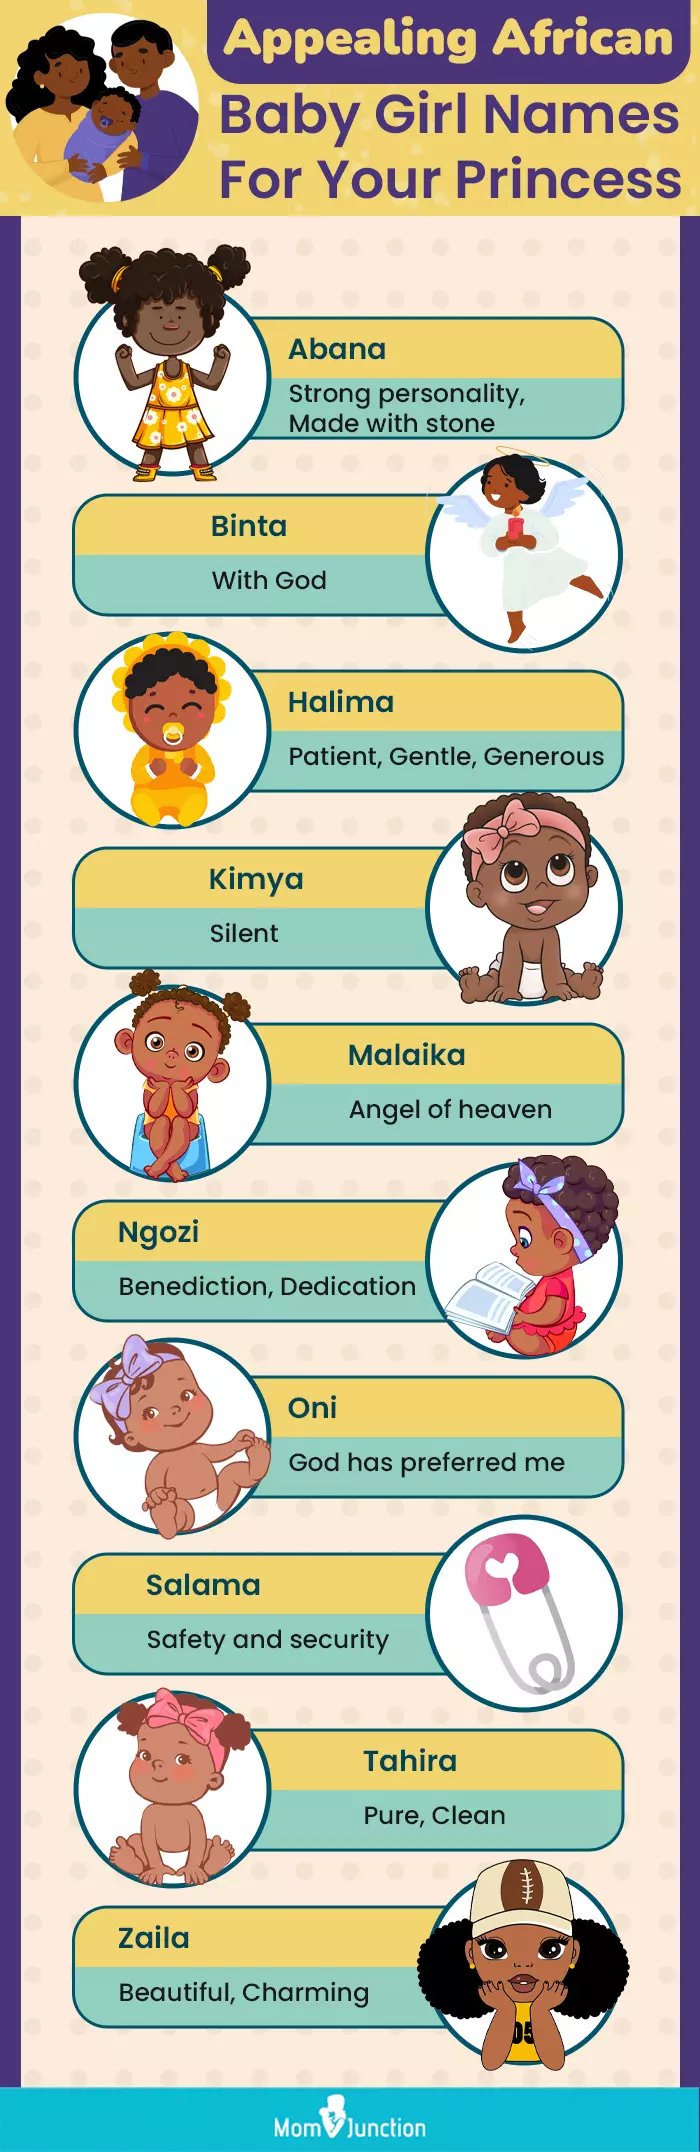 appealing african baby girl names for your princess (infographic)